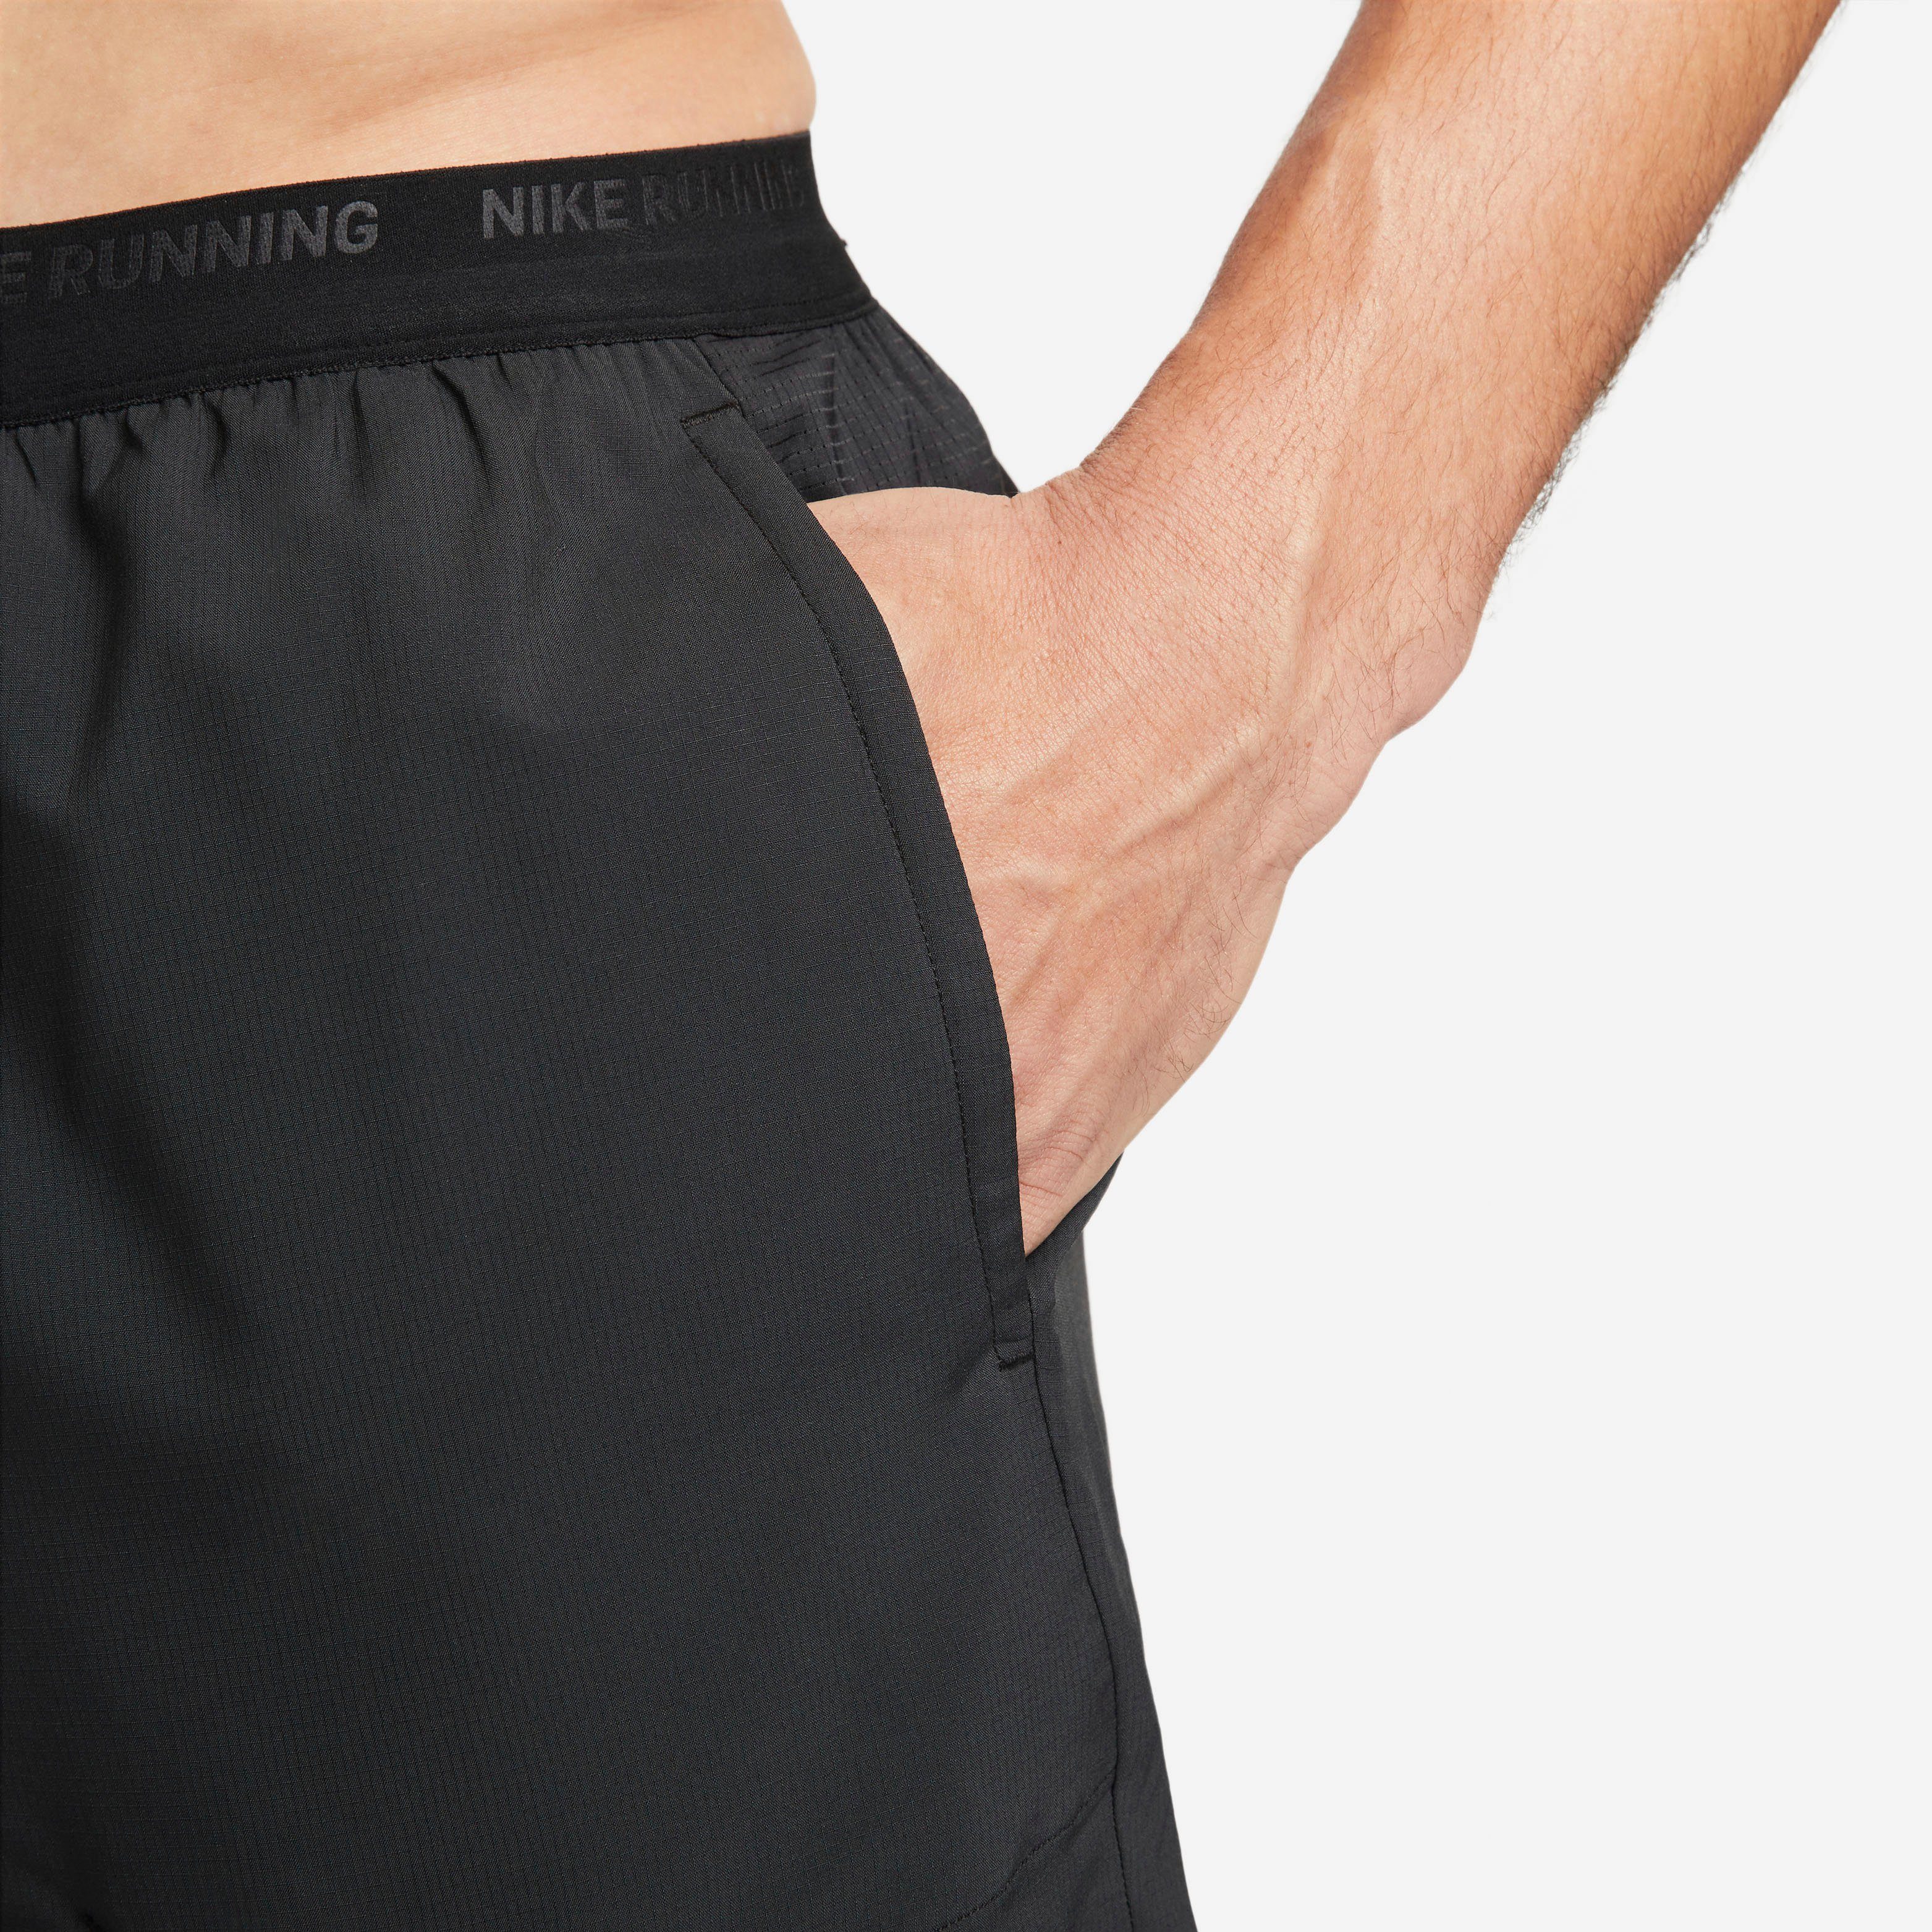 Laufshorts Brief-Lined Nike Running Men's " Dri-FIT Stride Shorts